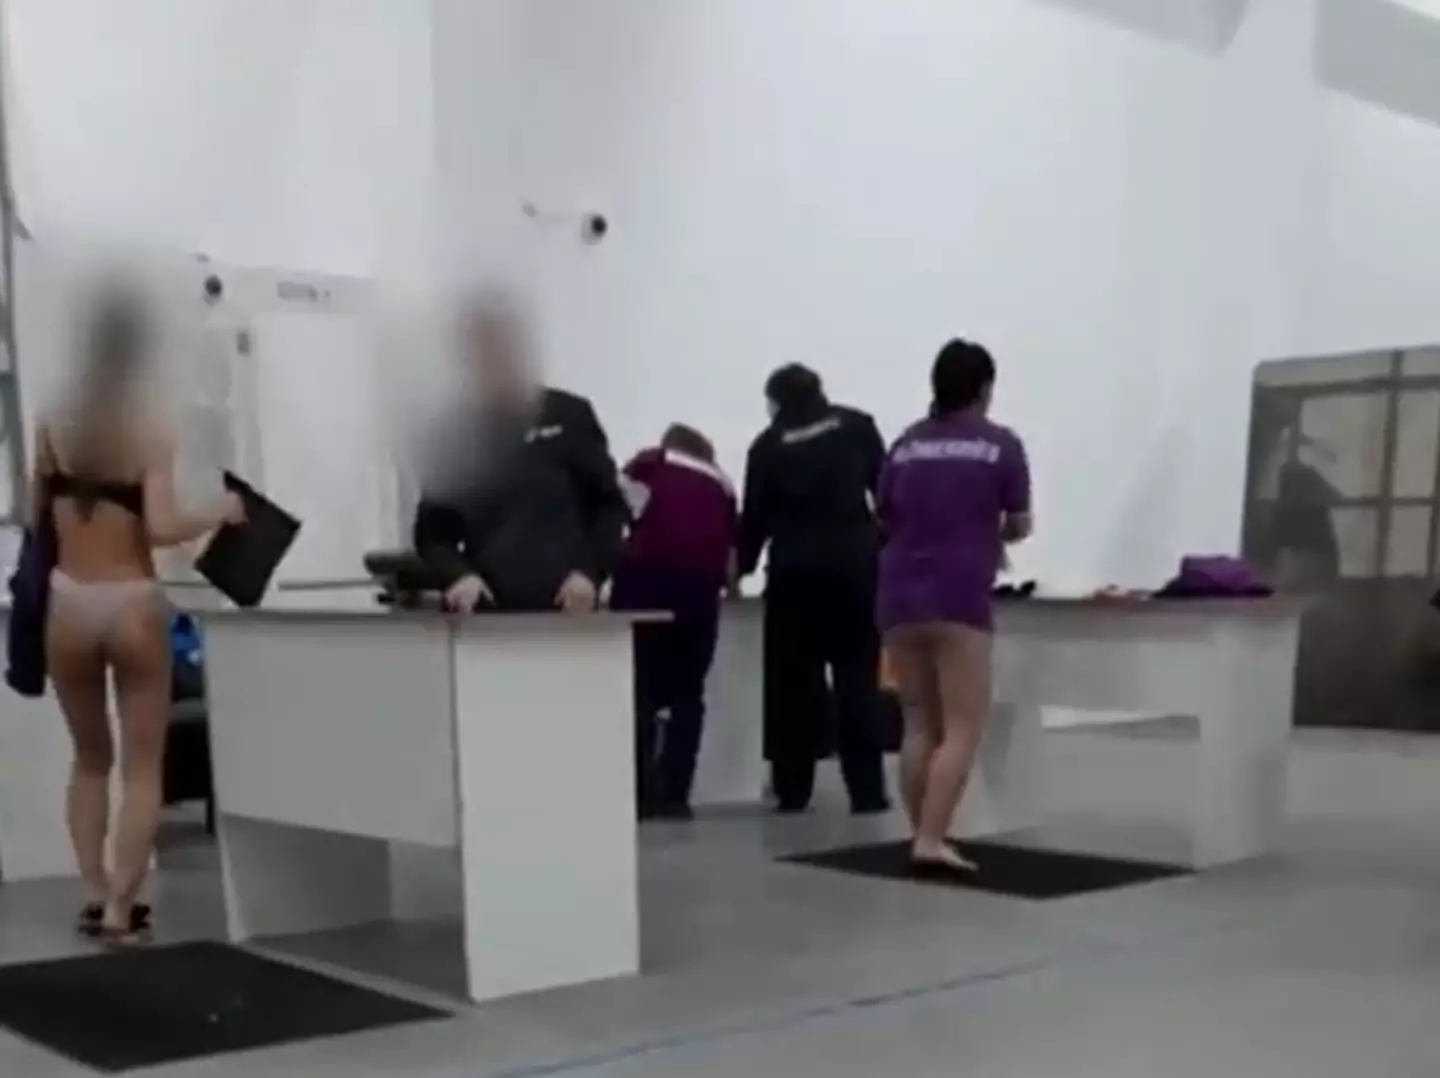 The footage showed workers in Russia being forced to go through a strip search.